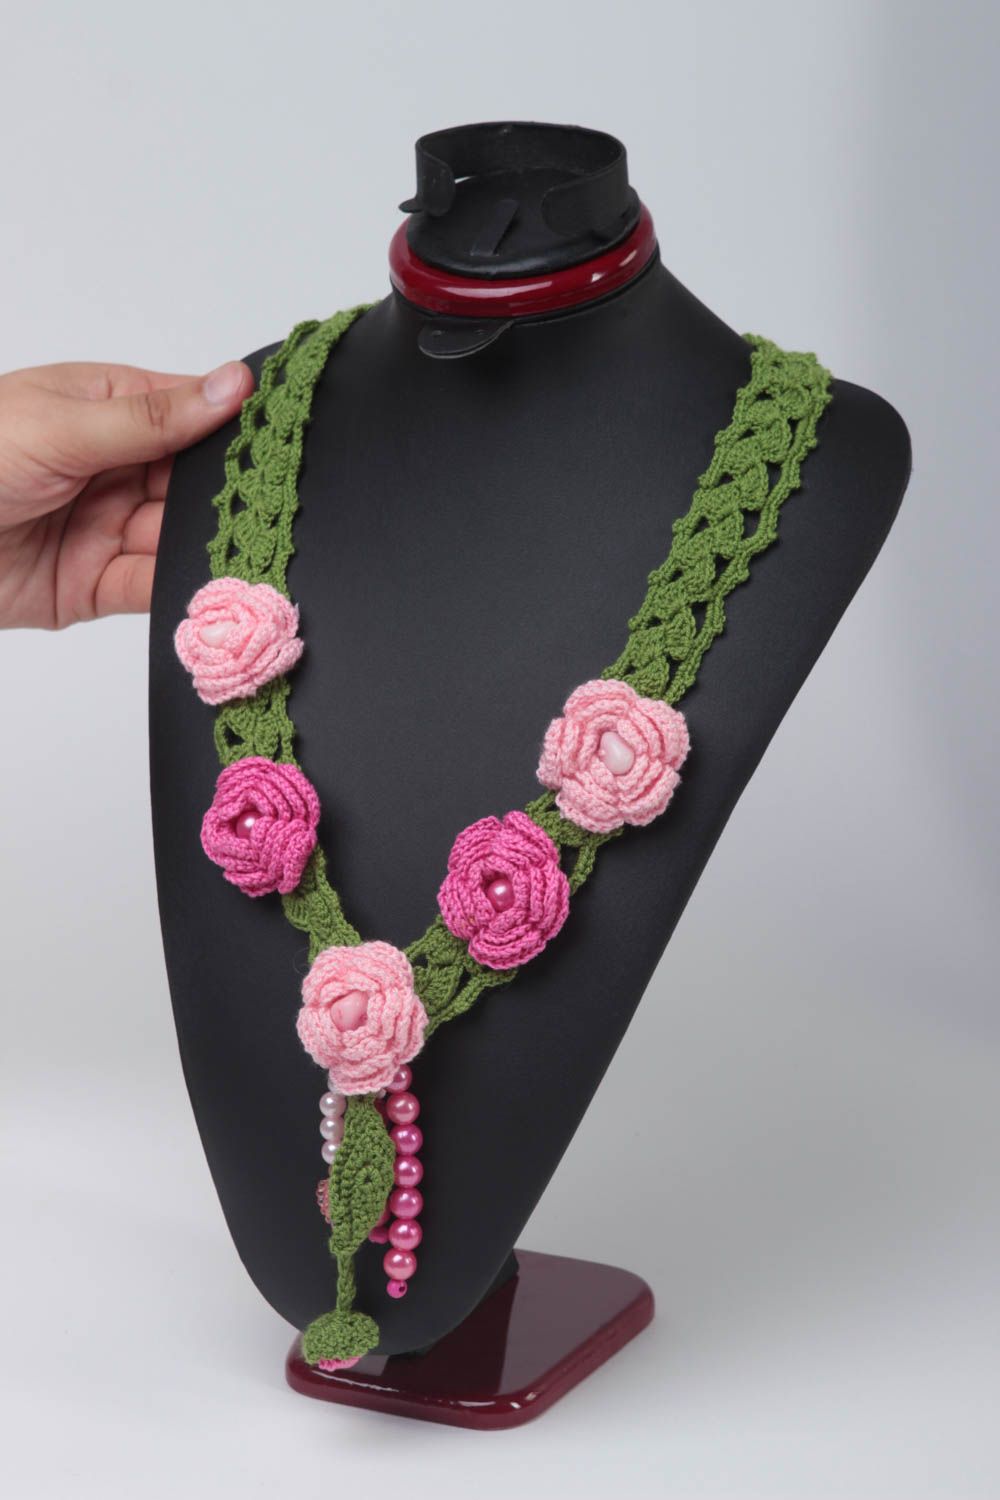 Handmade textile necklace crocheted flower necklace stylish accessory gift photo 5